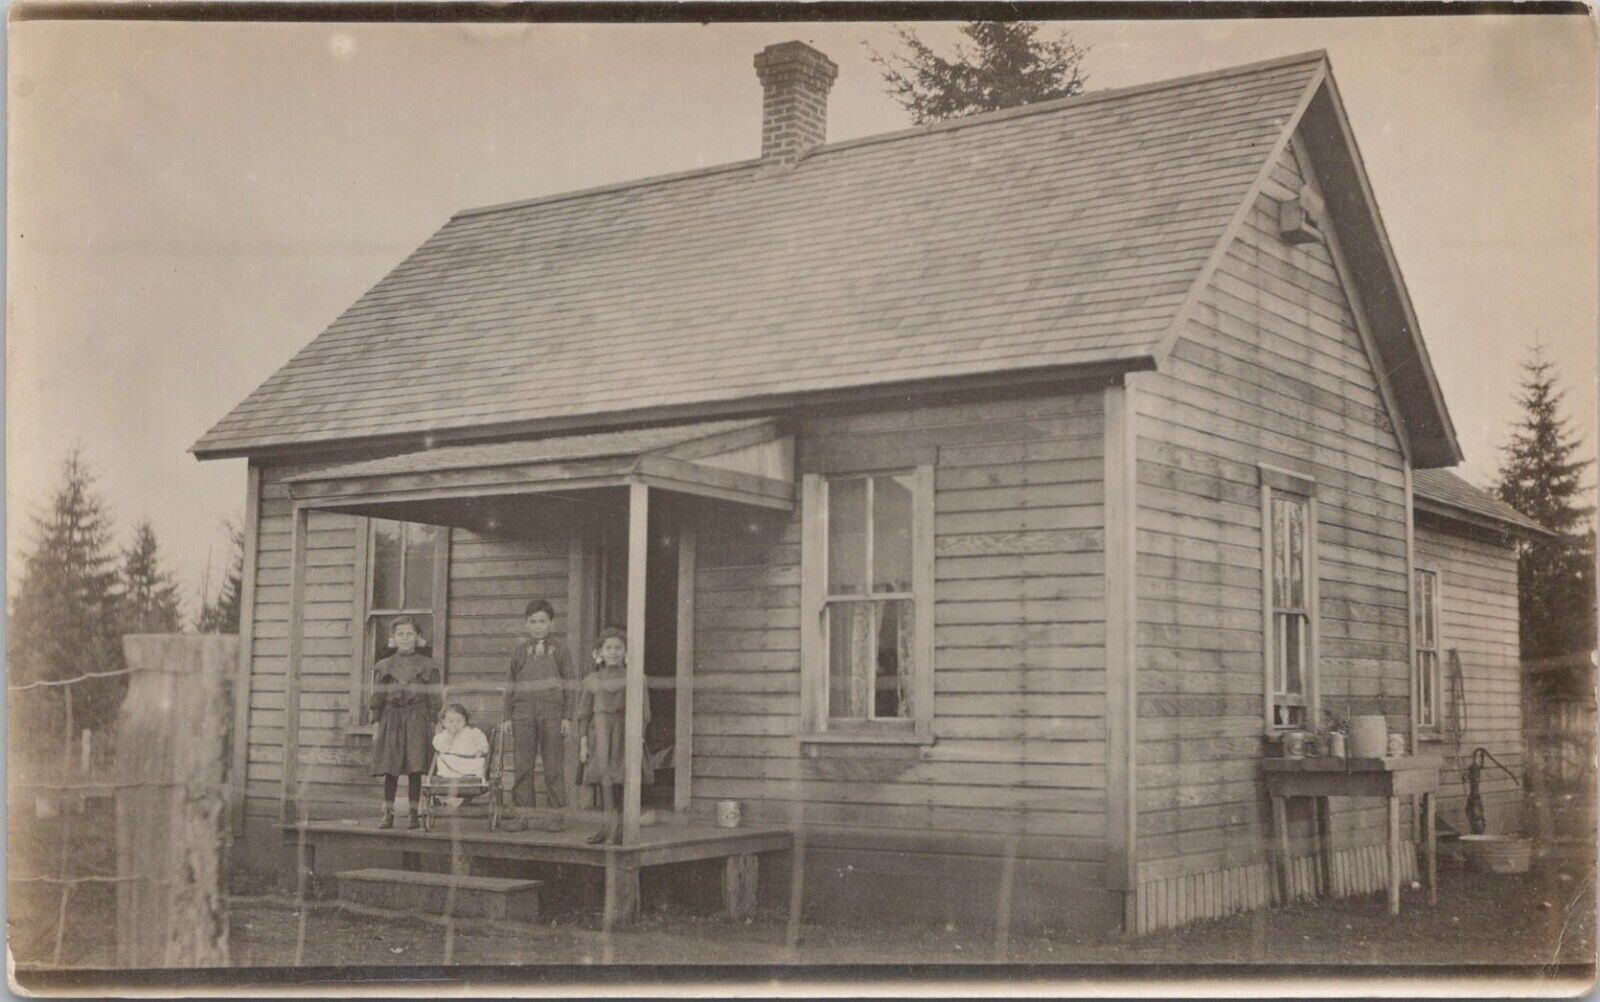 RPPC Poverty Scene Four Children Posing on Small Wooden House Porch early 1900s